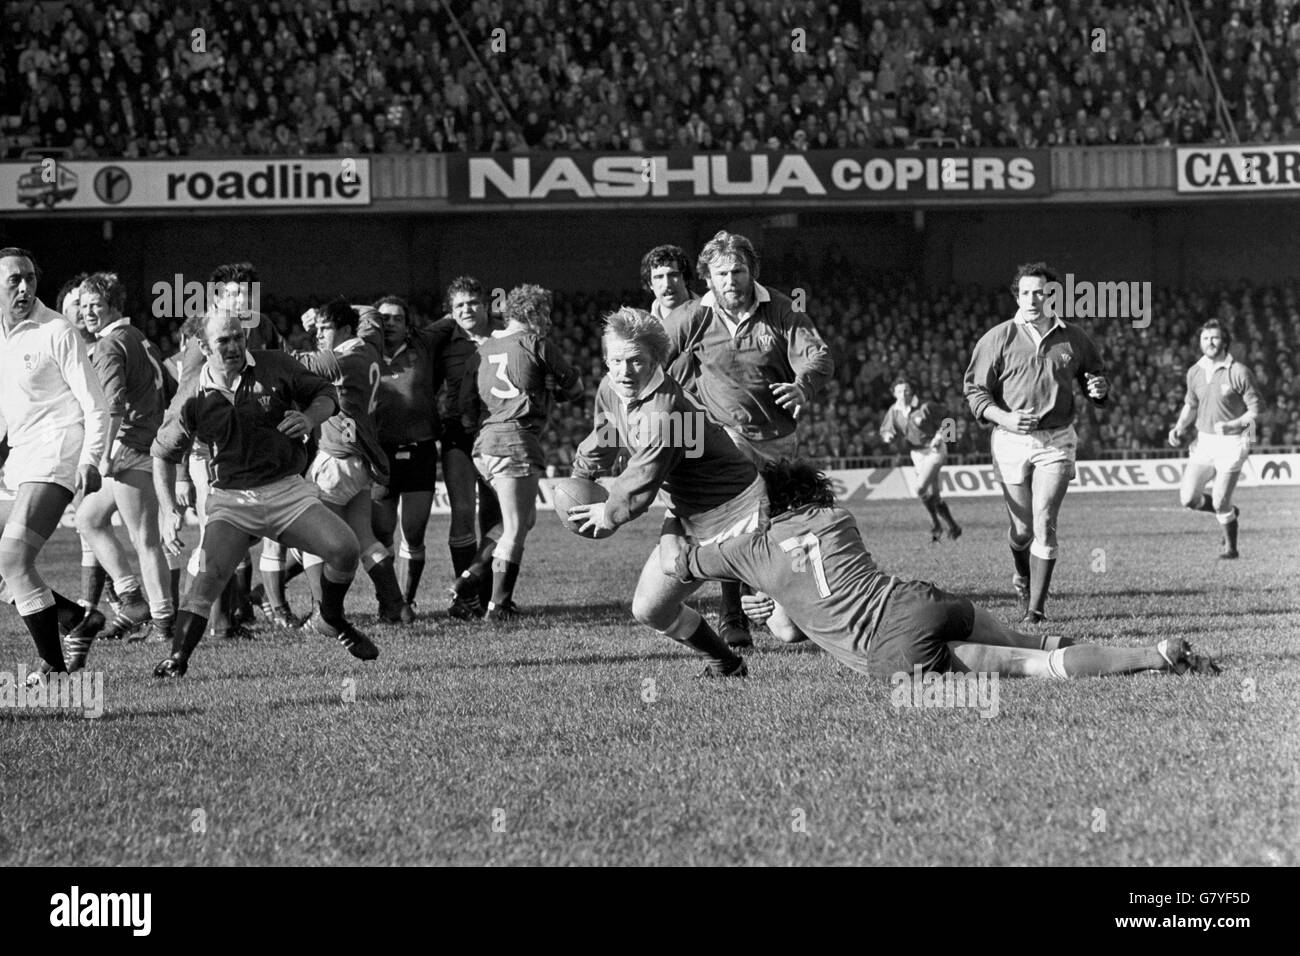 Wales' Steve Fenwick (c, with ball) is tackled by France's Jean-Claude Skrela (7), watched by teammates Terry Cobner (l), Gareth Edwards (r), Derek Quinnell (second r) and Jeff Squire (behind Quinnell) Stock Photo